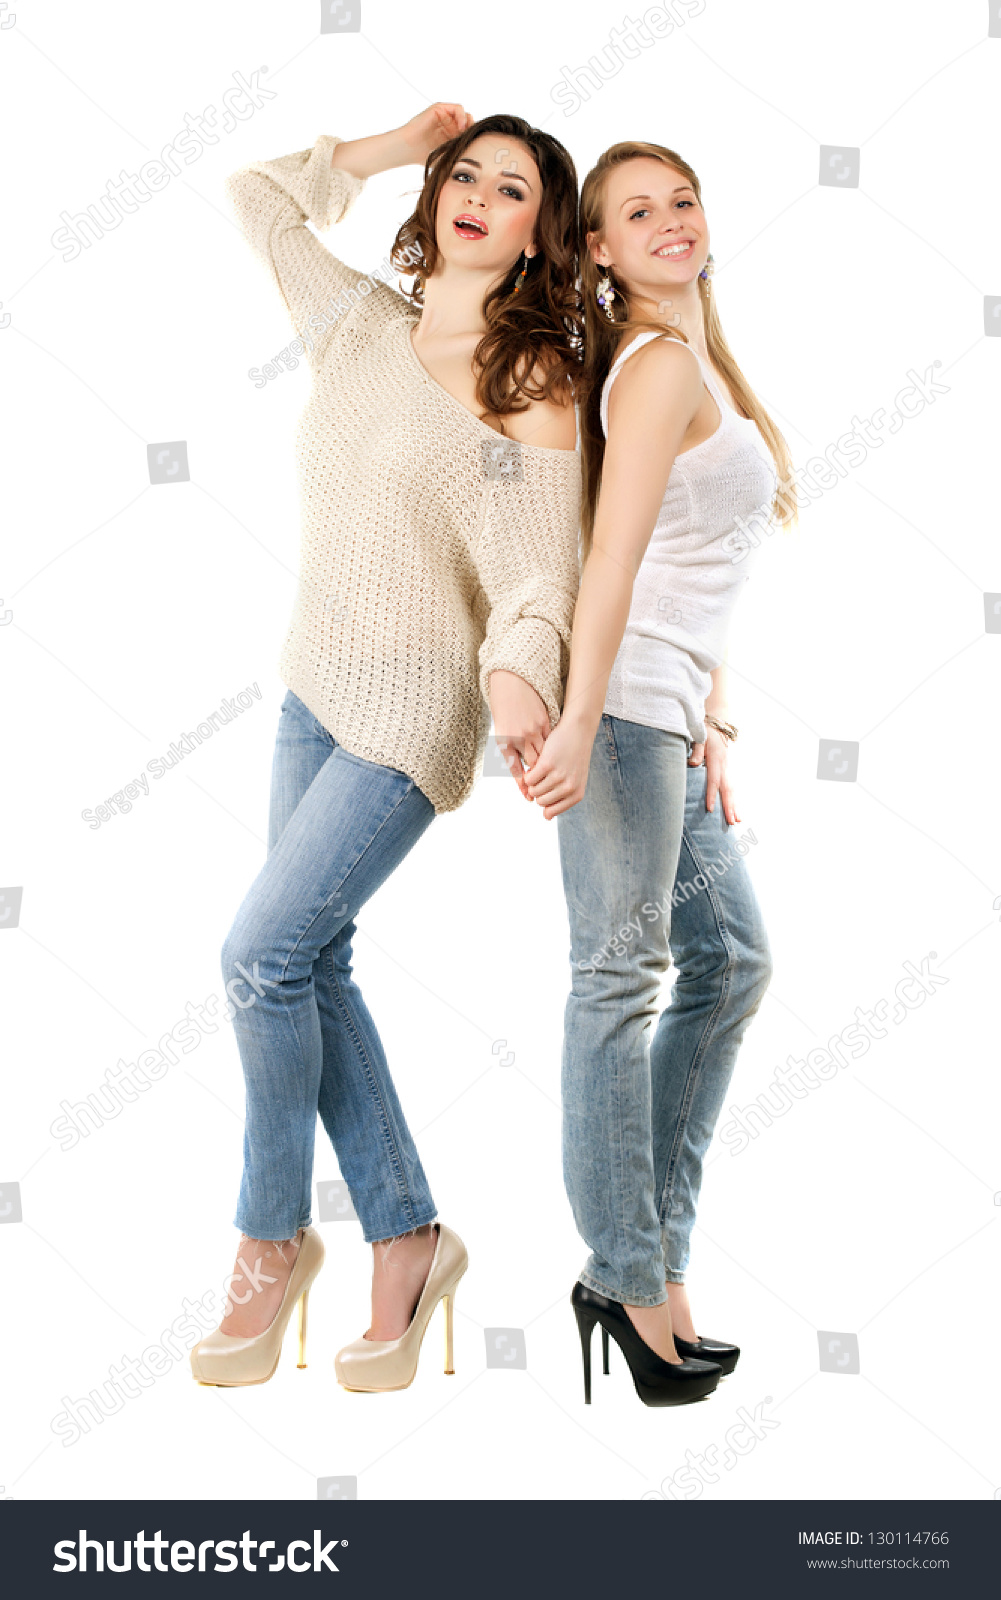 Attractive Caucasian Women Posing In Blue Jeans And High Heels ...